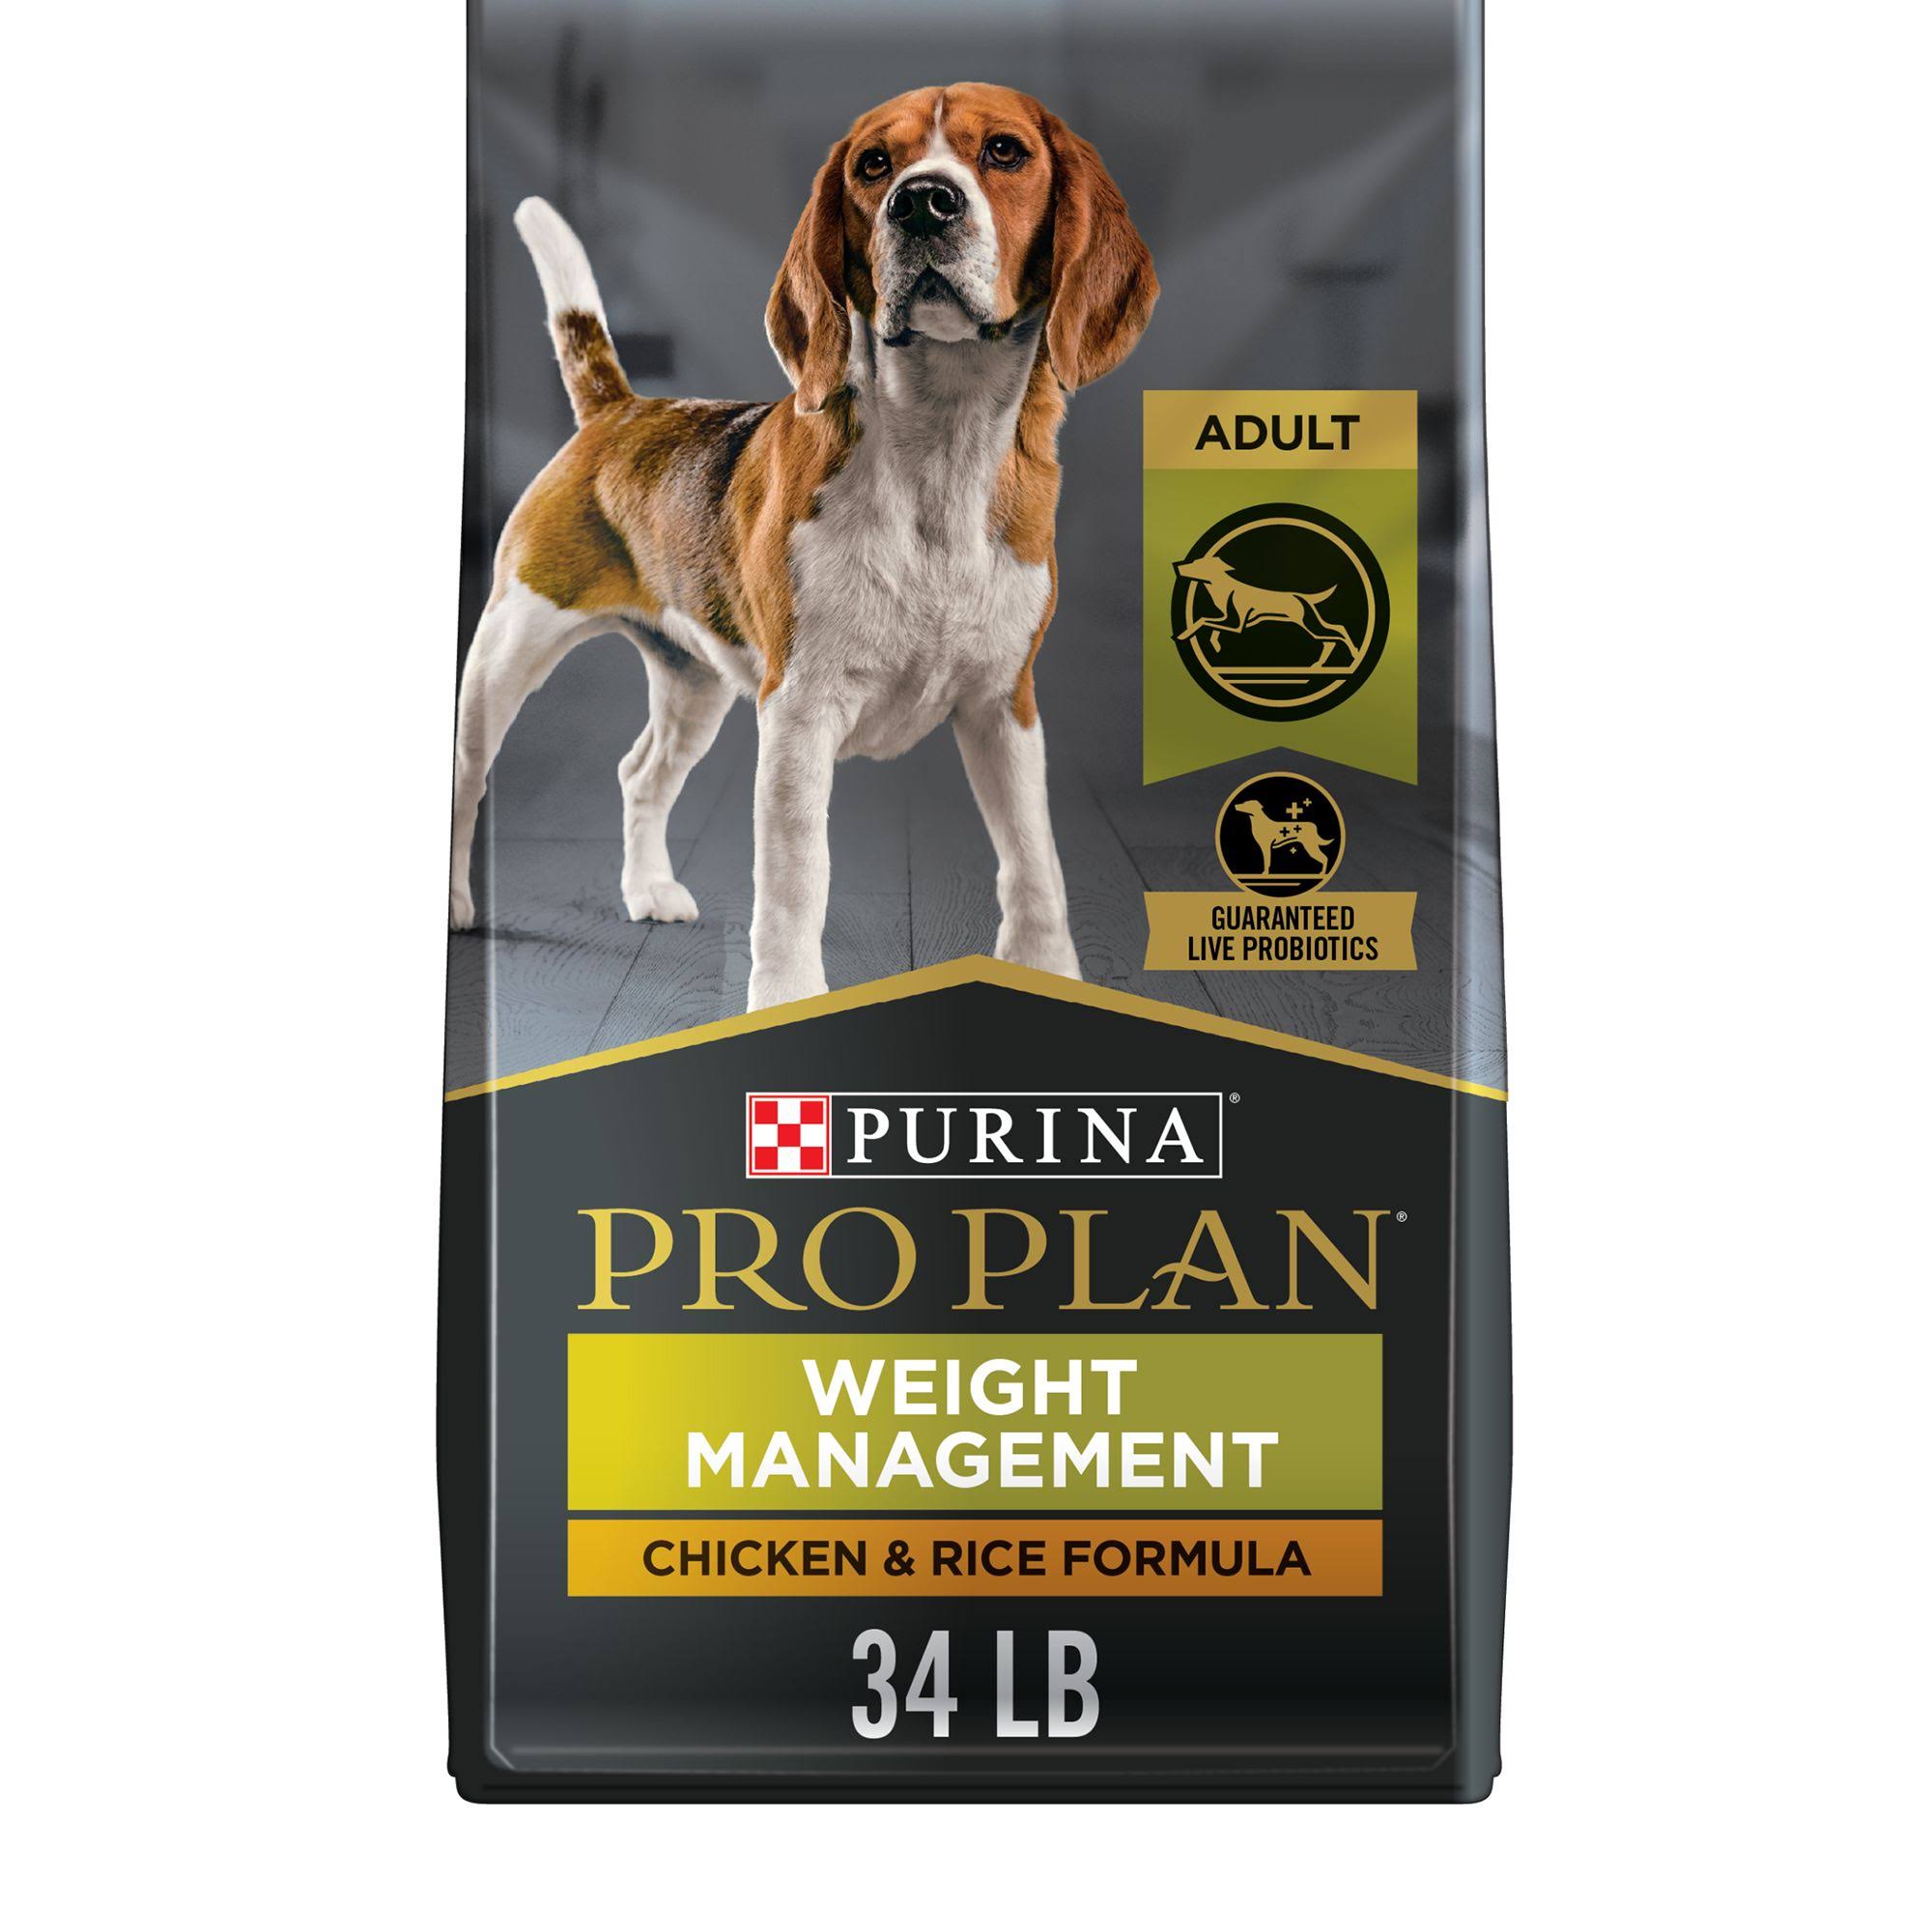 Purina Pro Plan Dry Dog Food - Focus, Adult Weight Management Formula, 6lbs, 34lbs